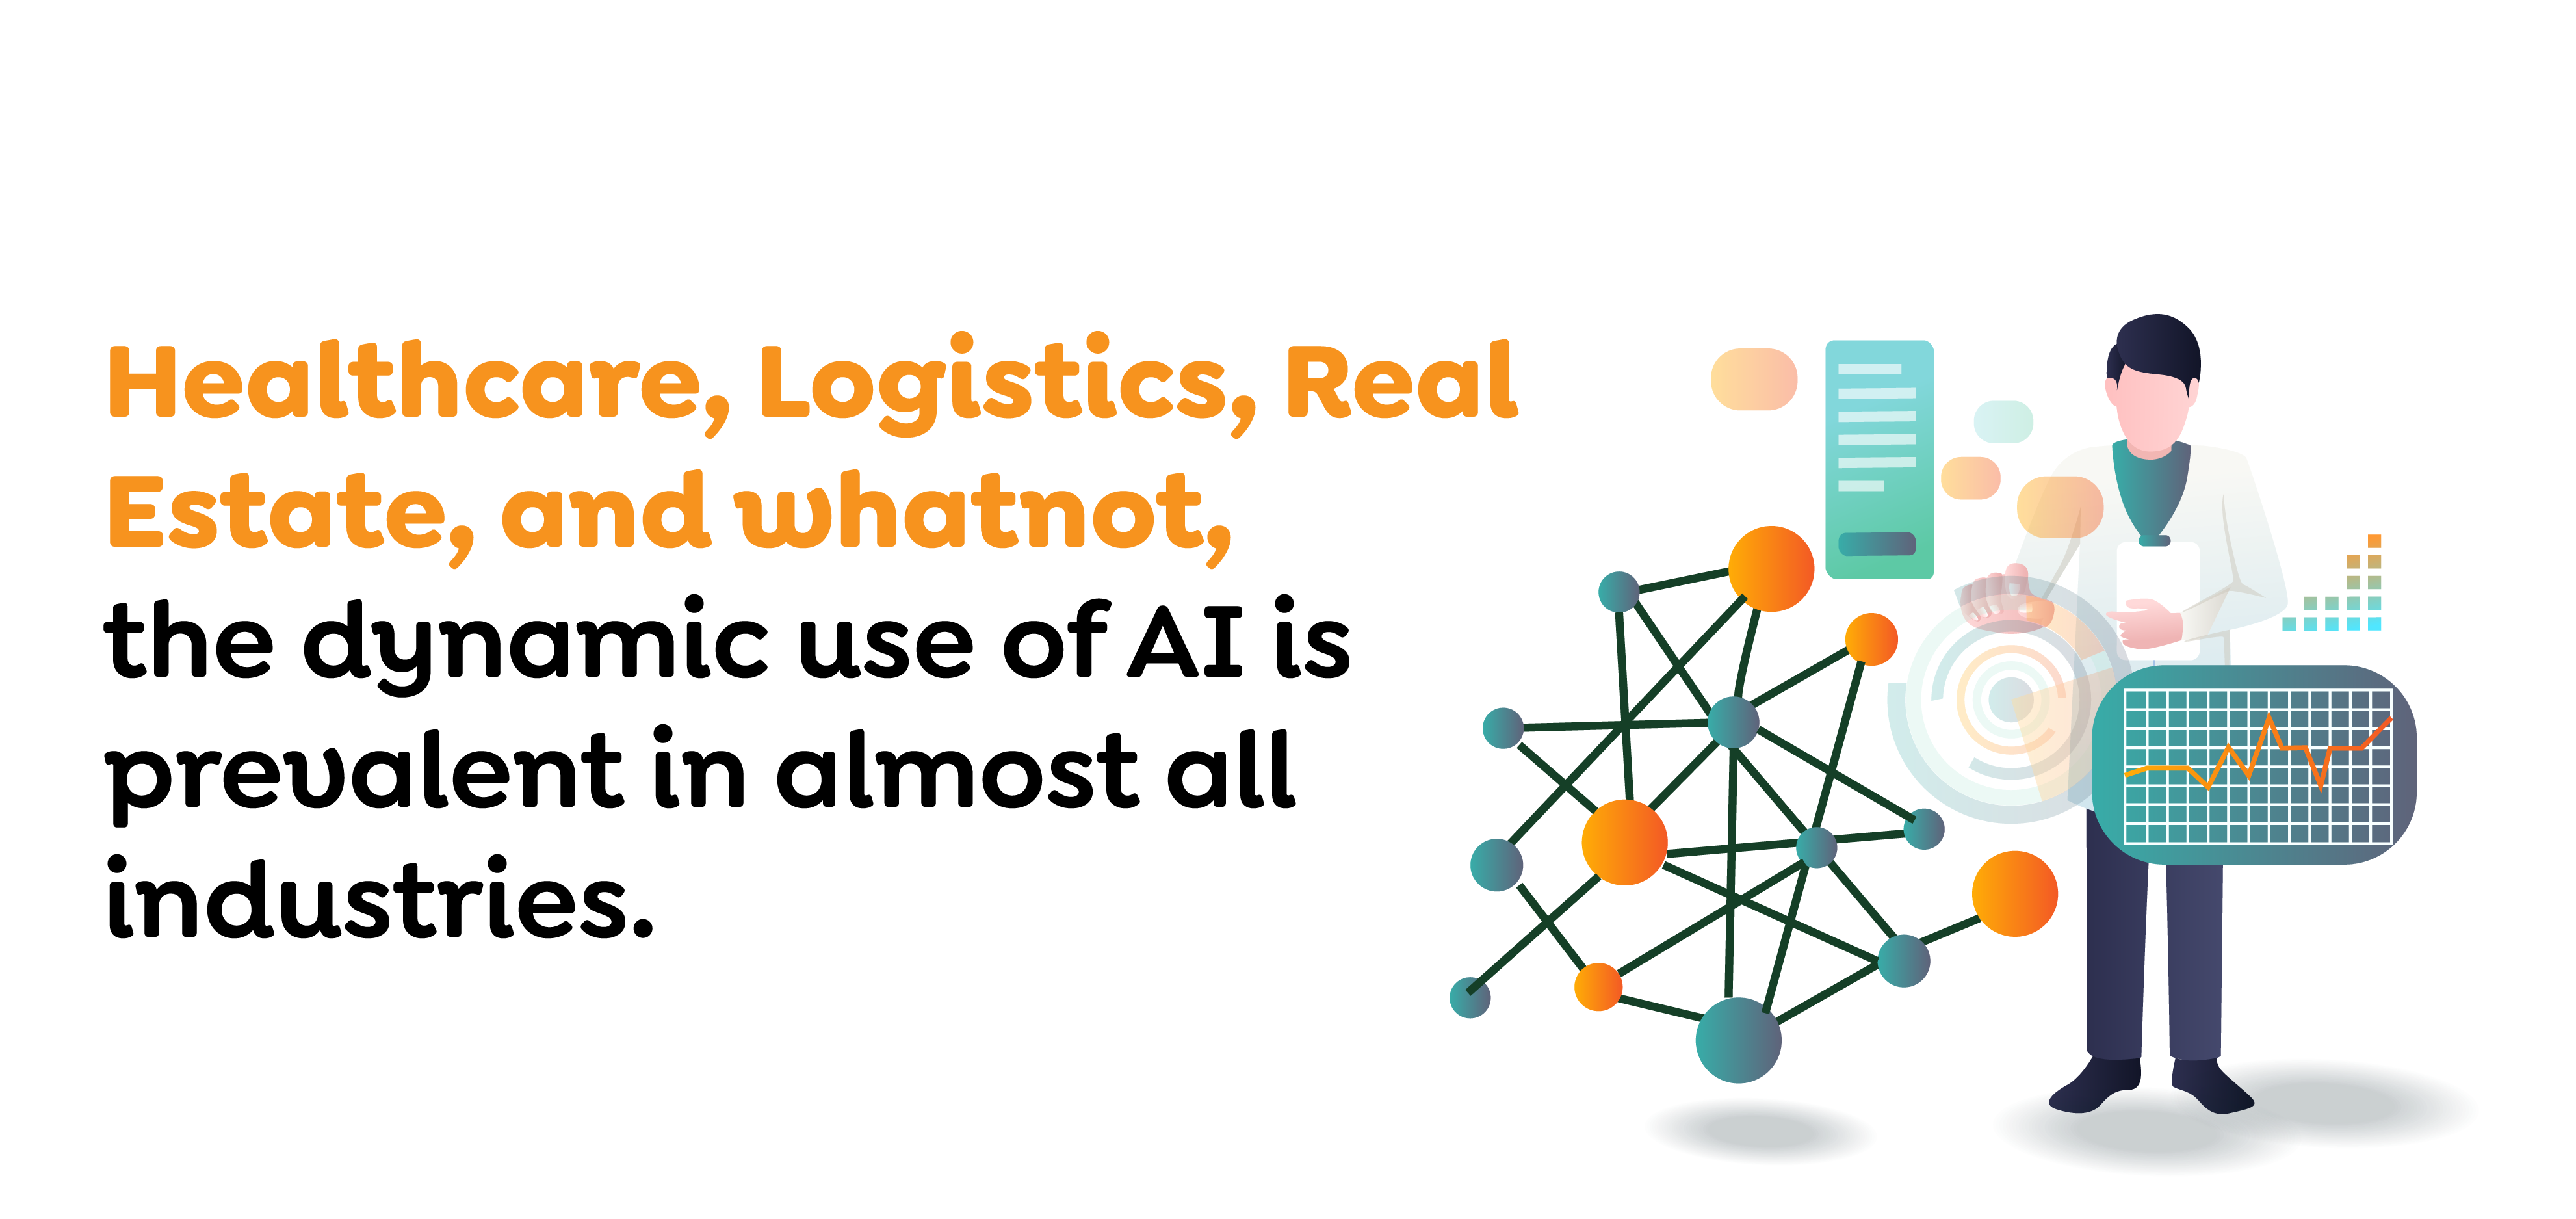 Healthcare, Logistics, Real Estate, and whatnot, the dynamic use of AI is prevalent in almost all in